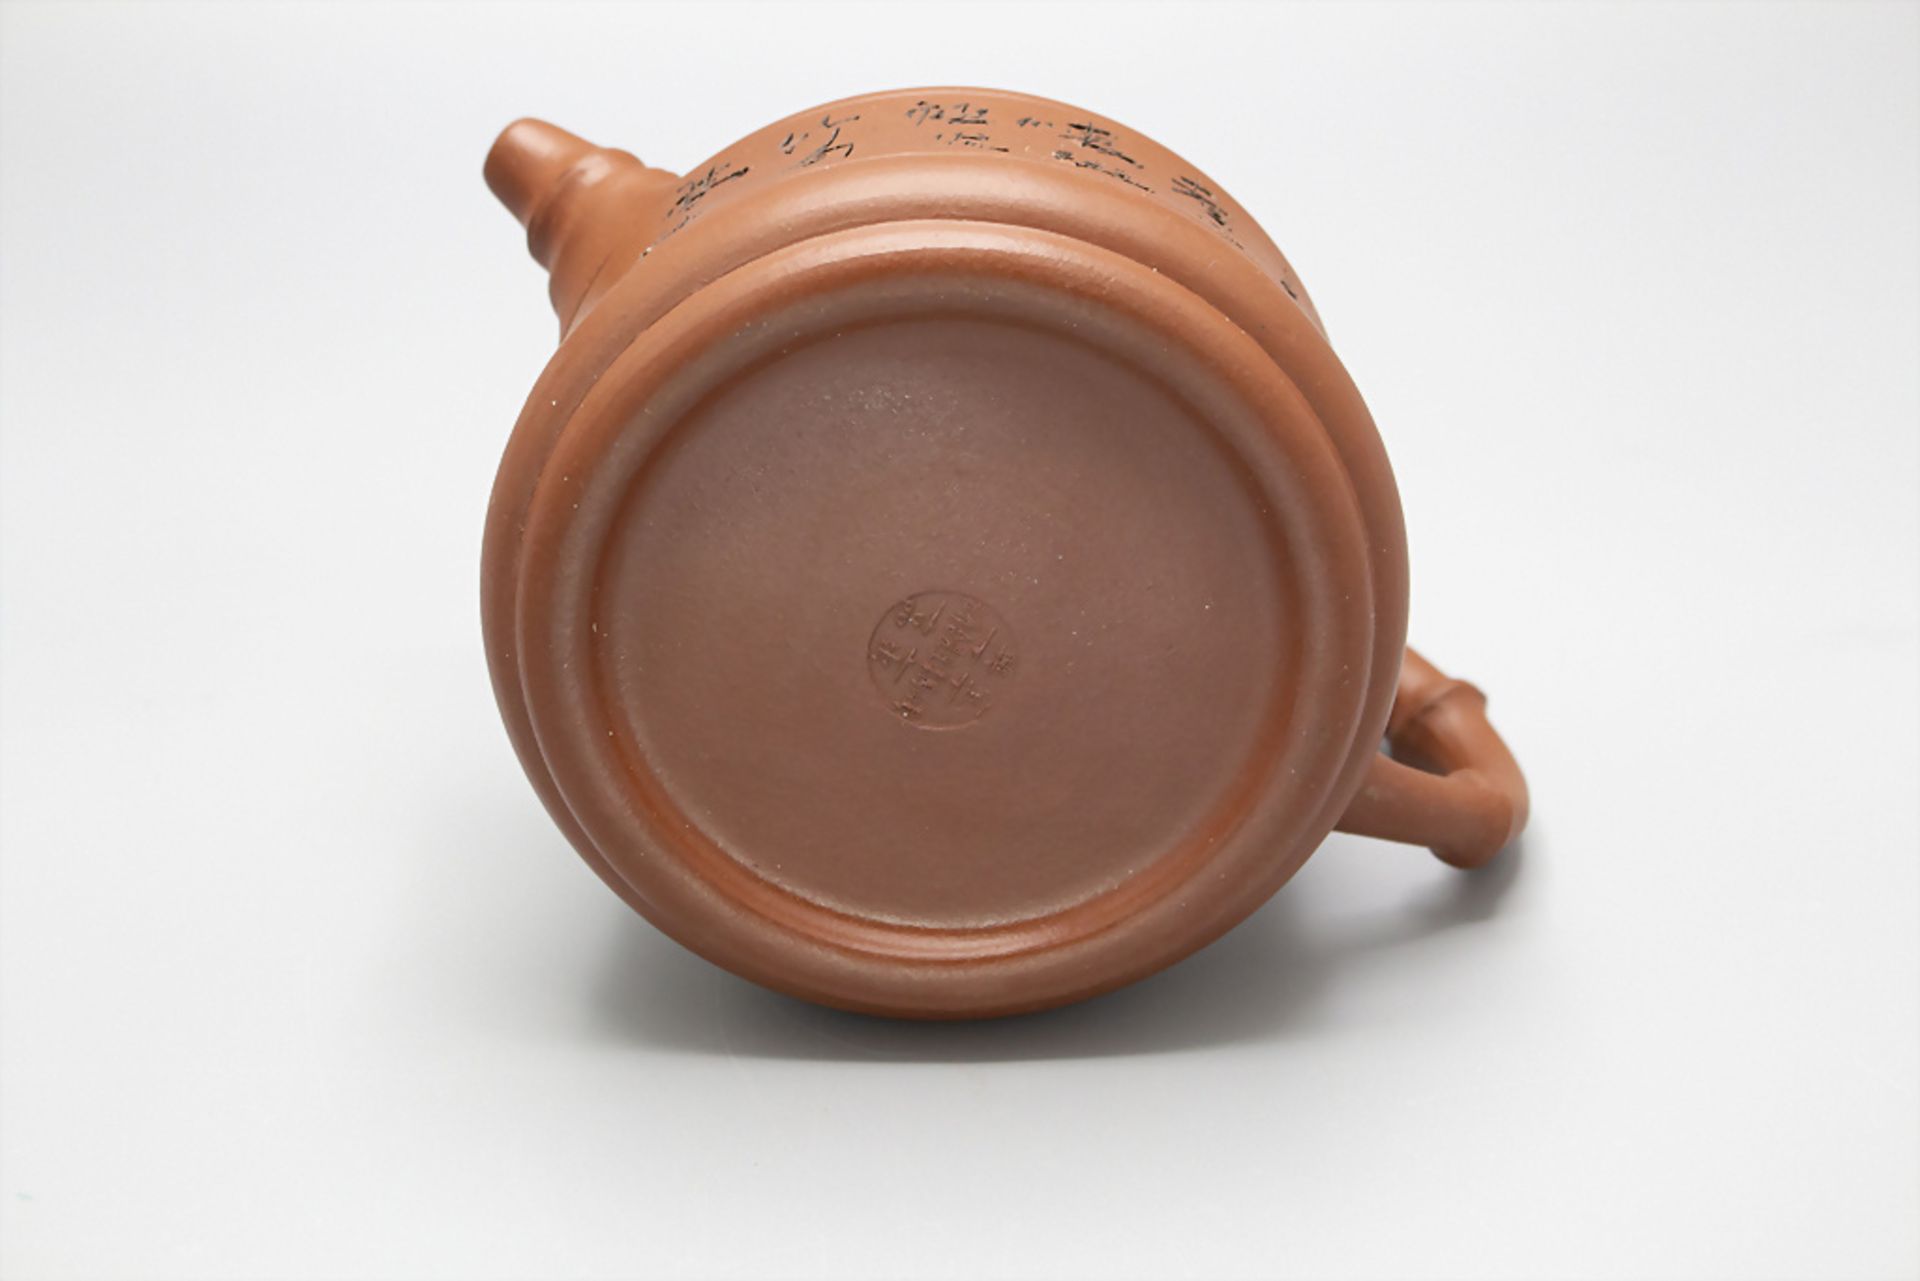 Bambus Teekanne mit Inschrift / A bamboo teapot with inscription, China, um 20. Jh. - Image 6 of 8